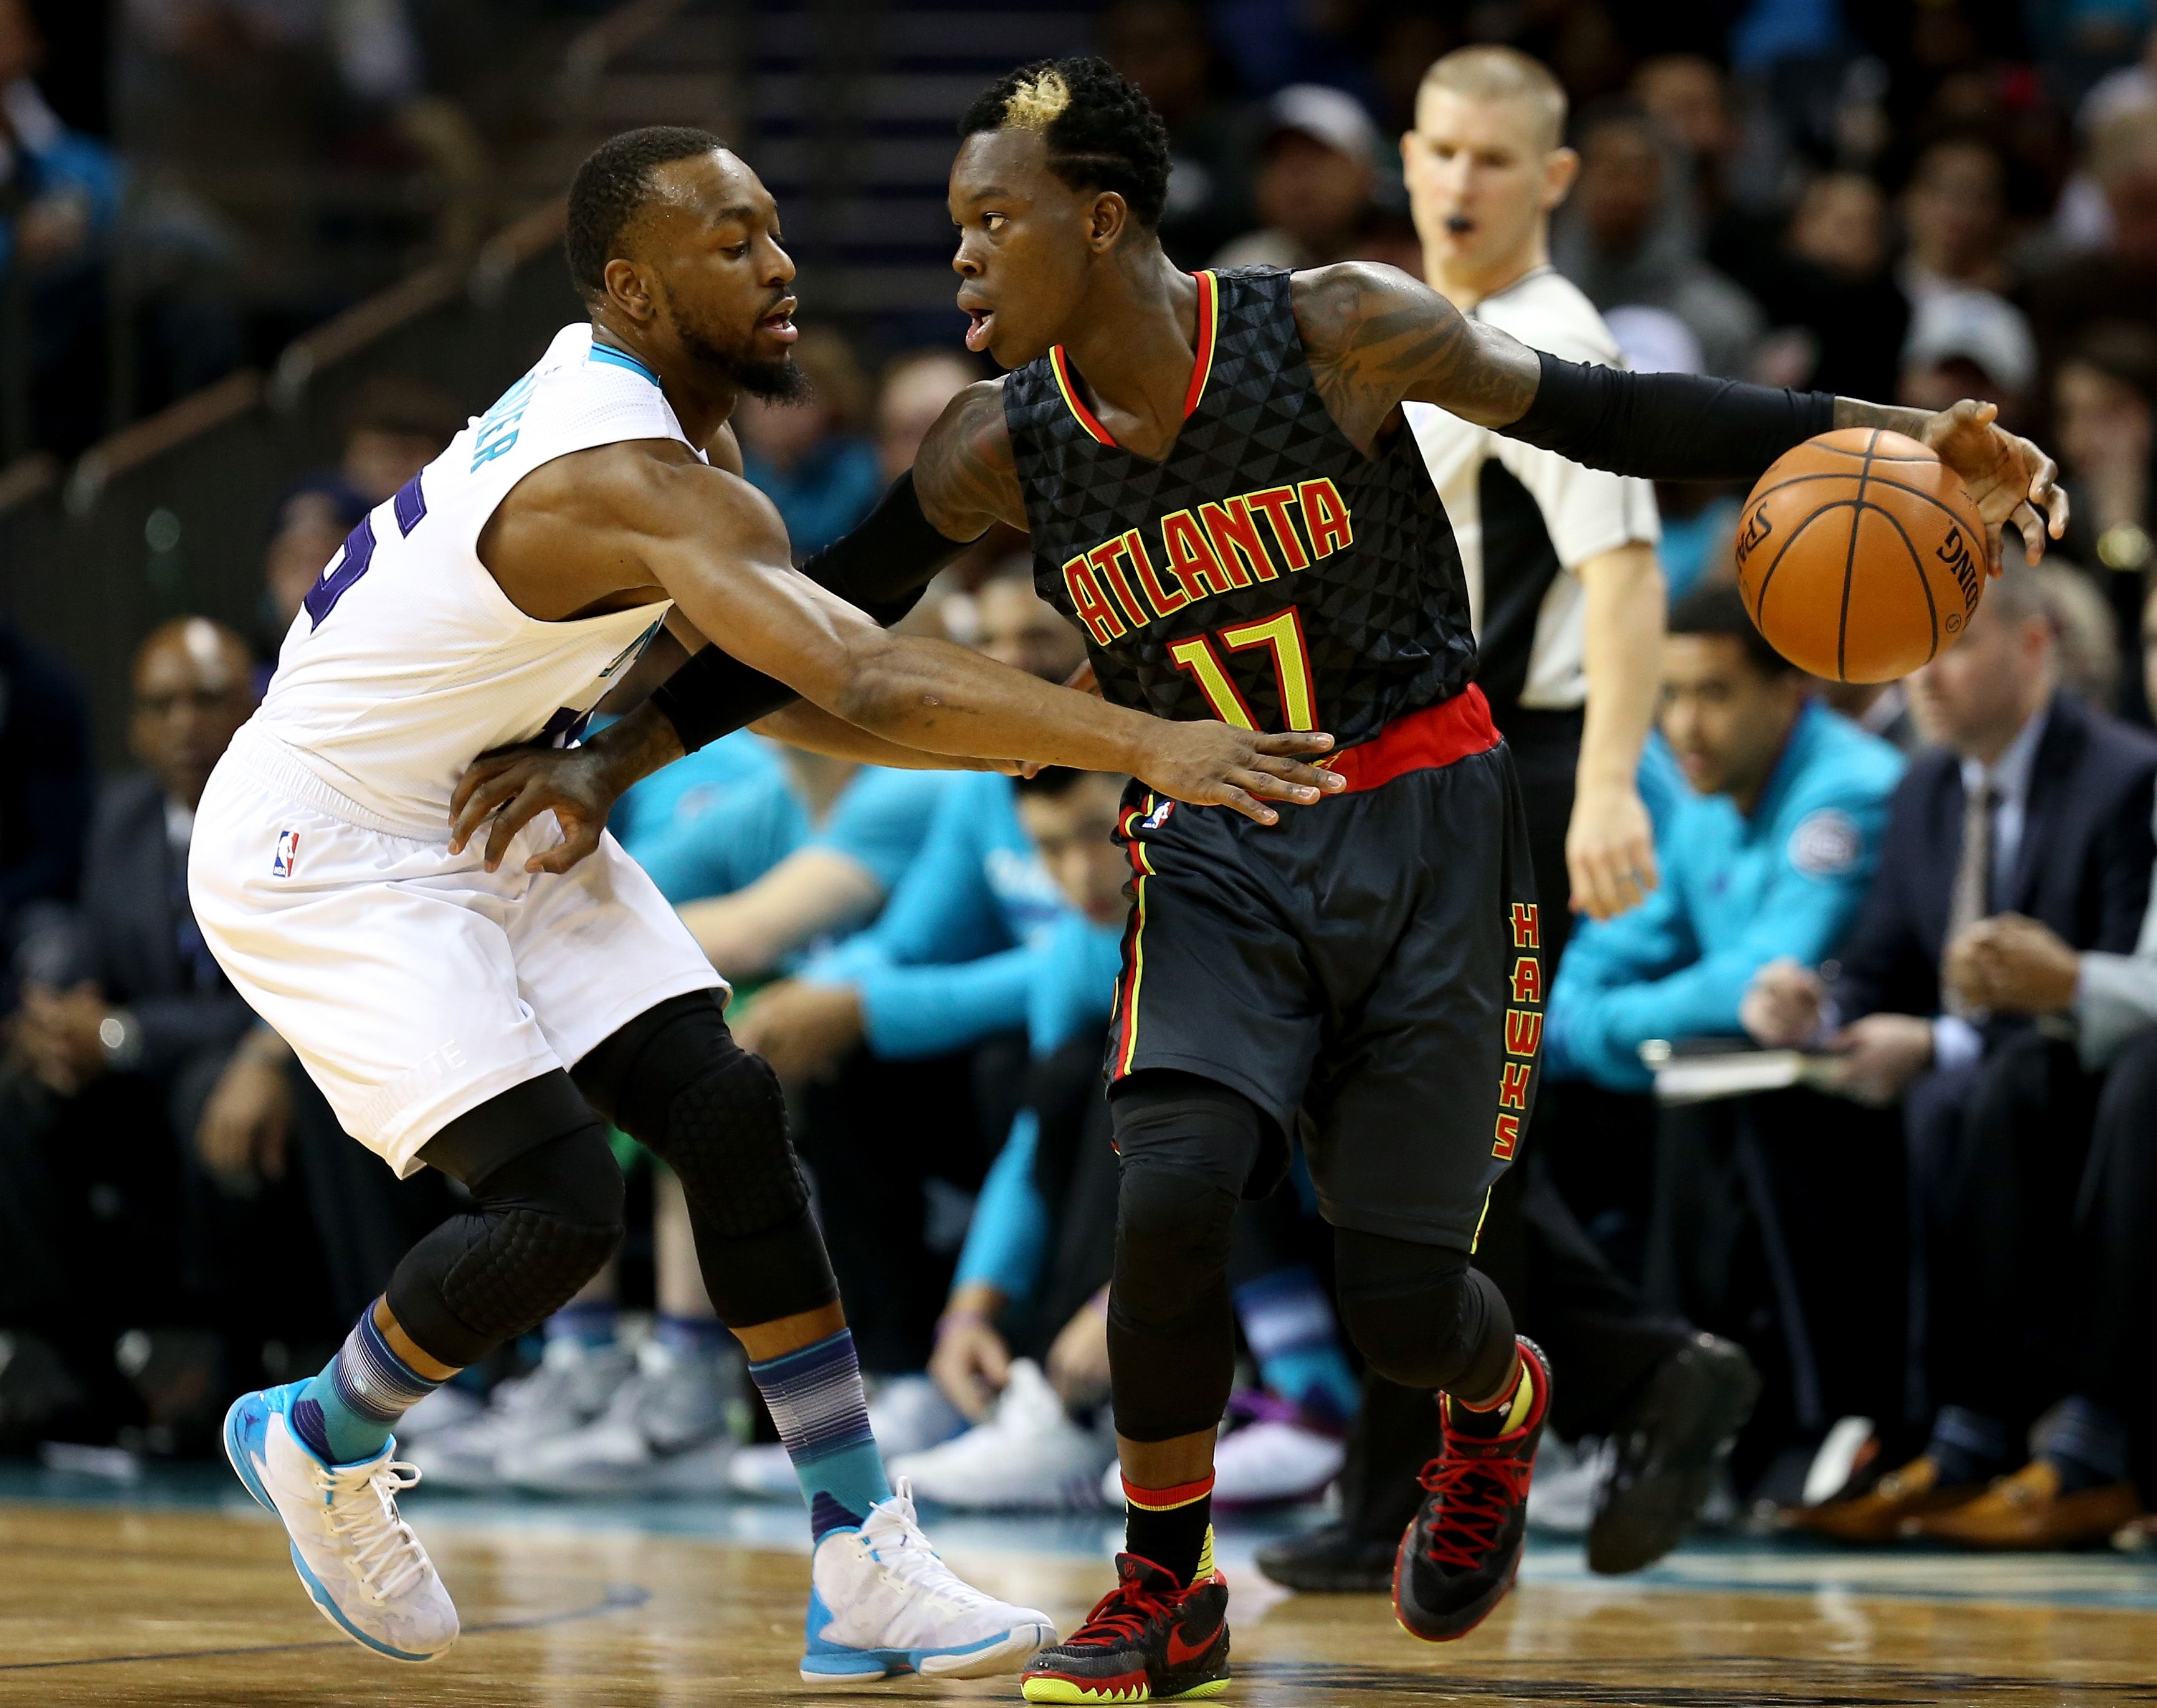 Kemba Walker trying to take the ball from Dennis Schroder